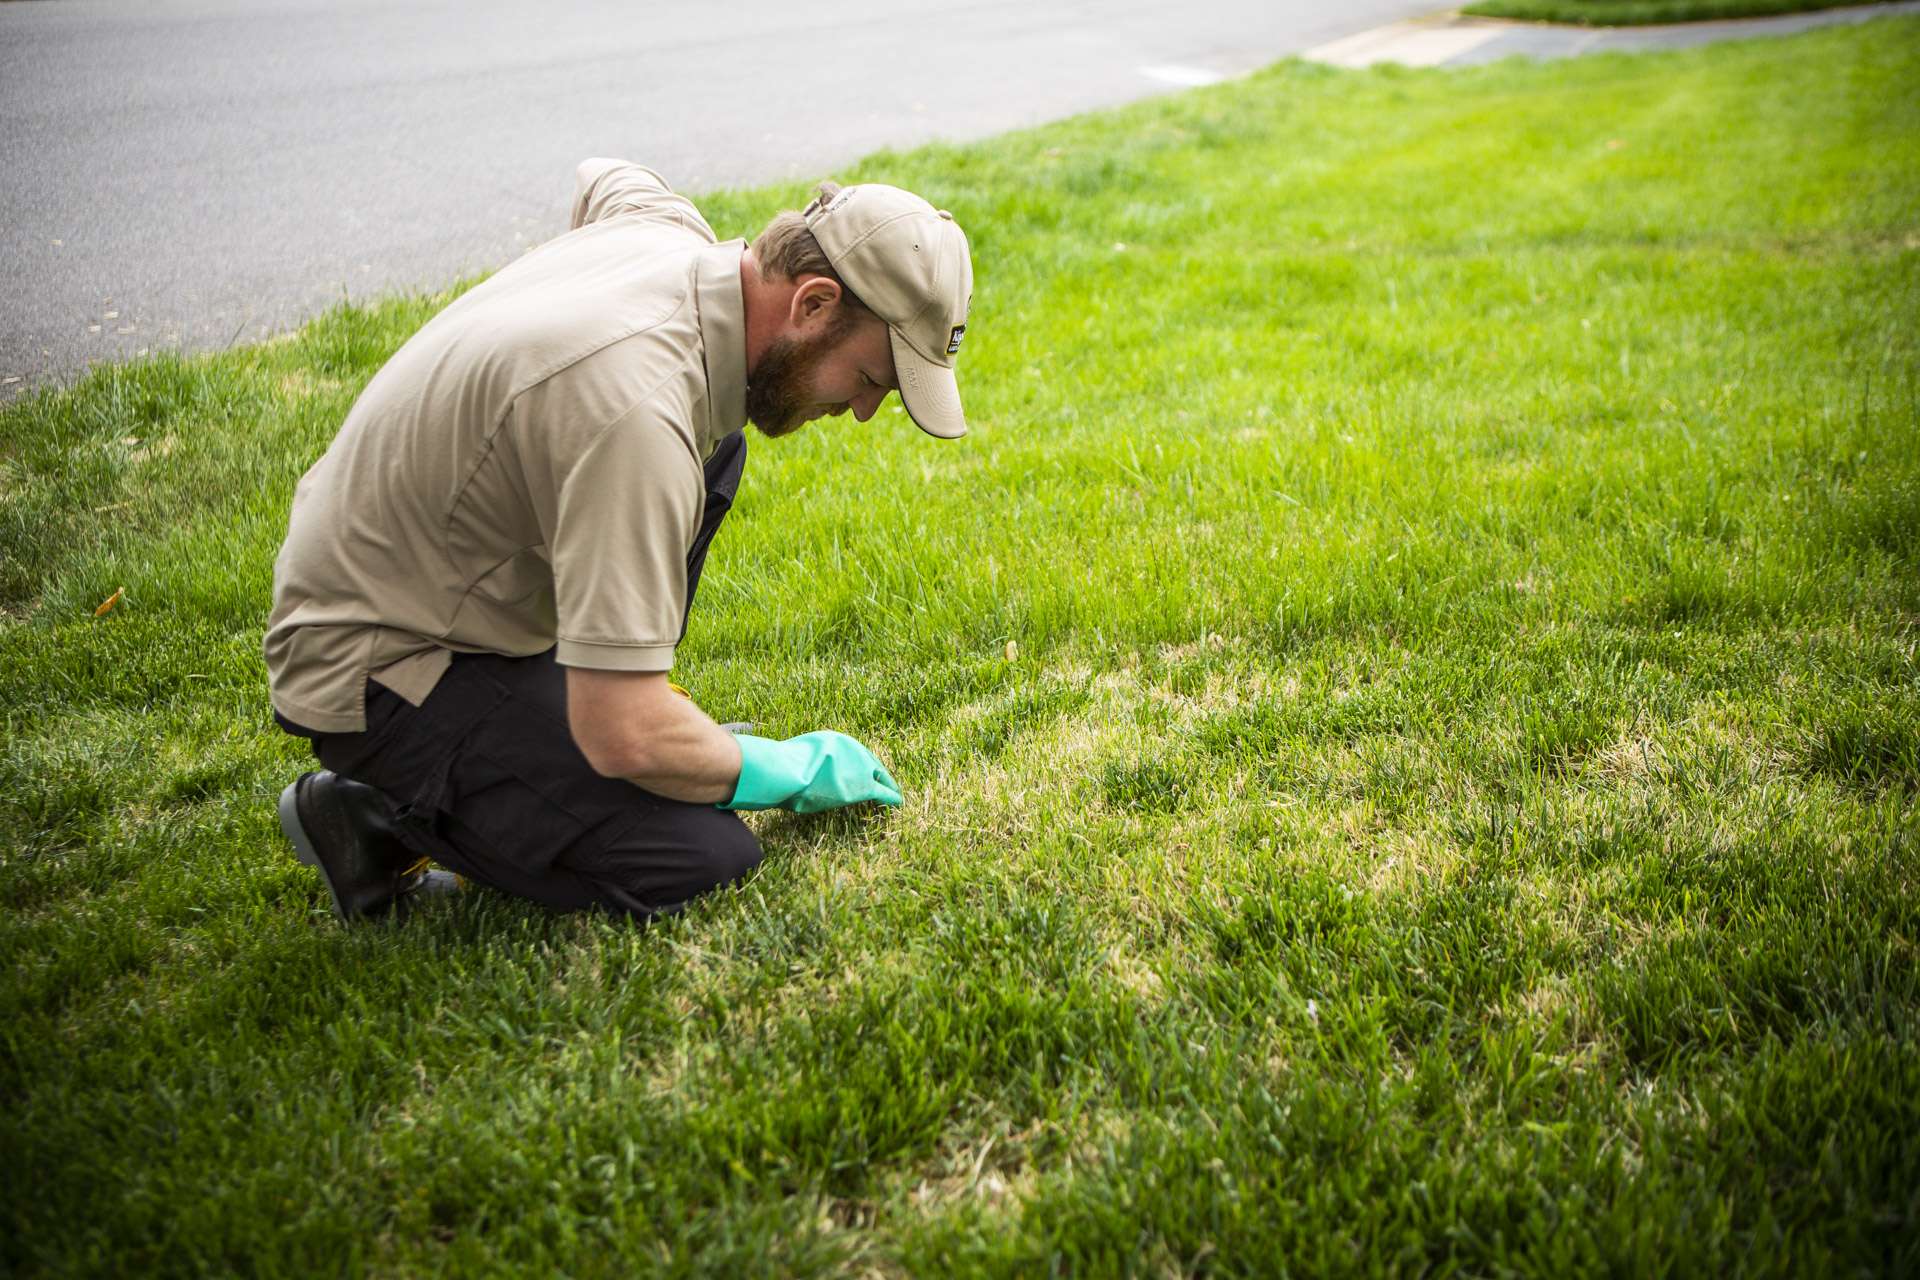 Lawn care technician inspecting a lawn for disease